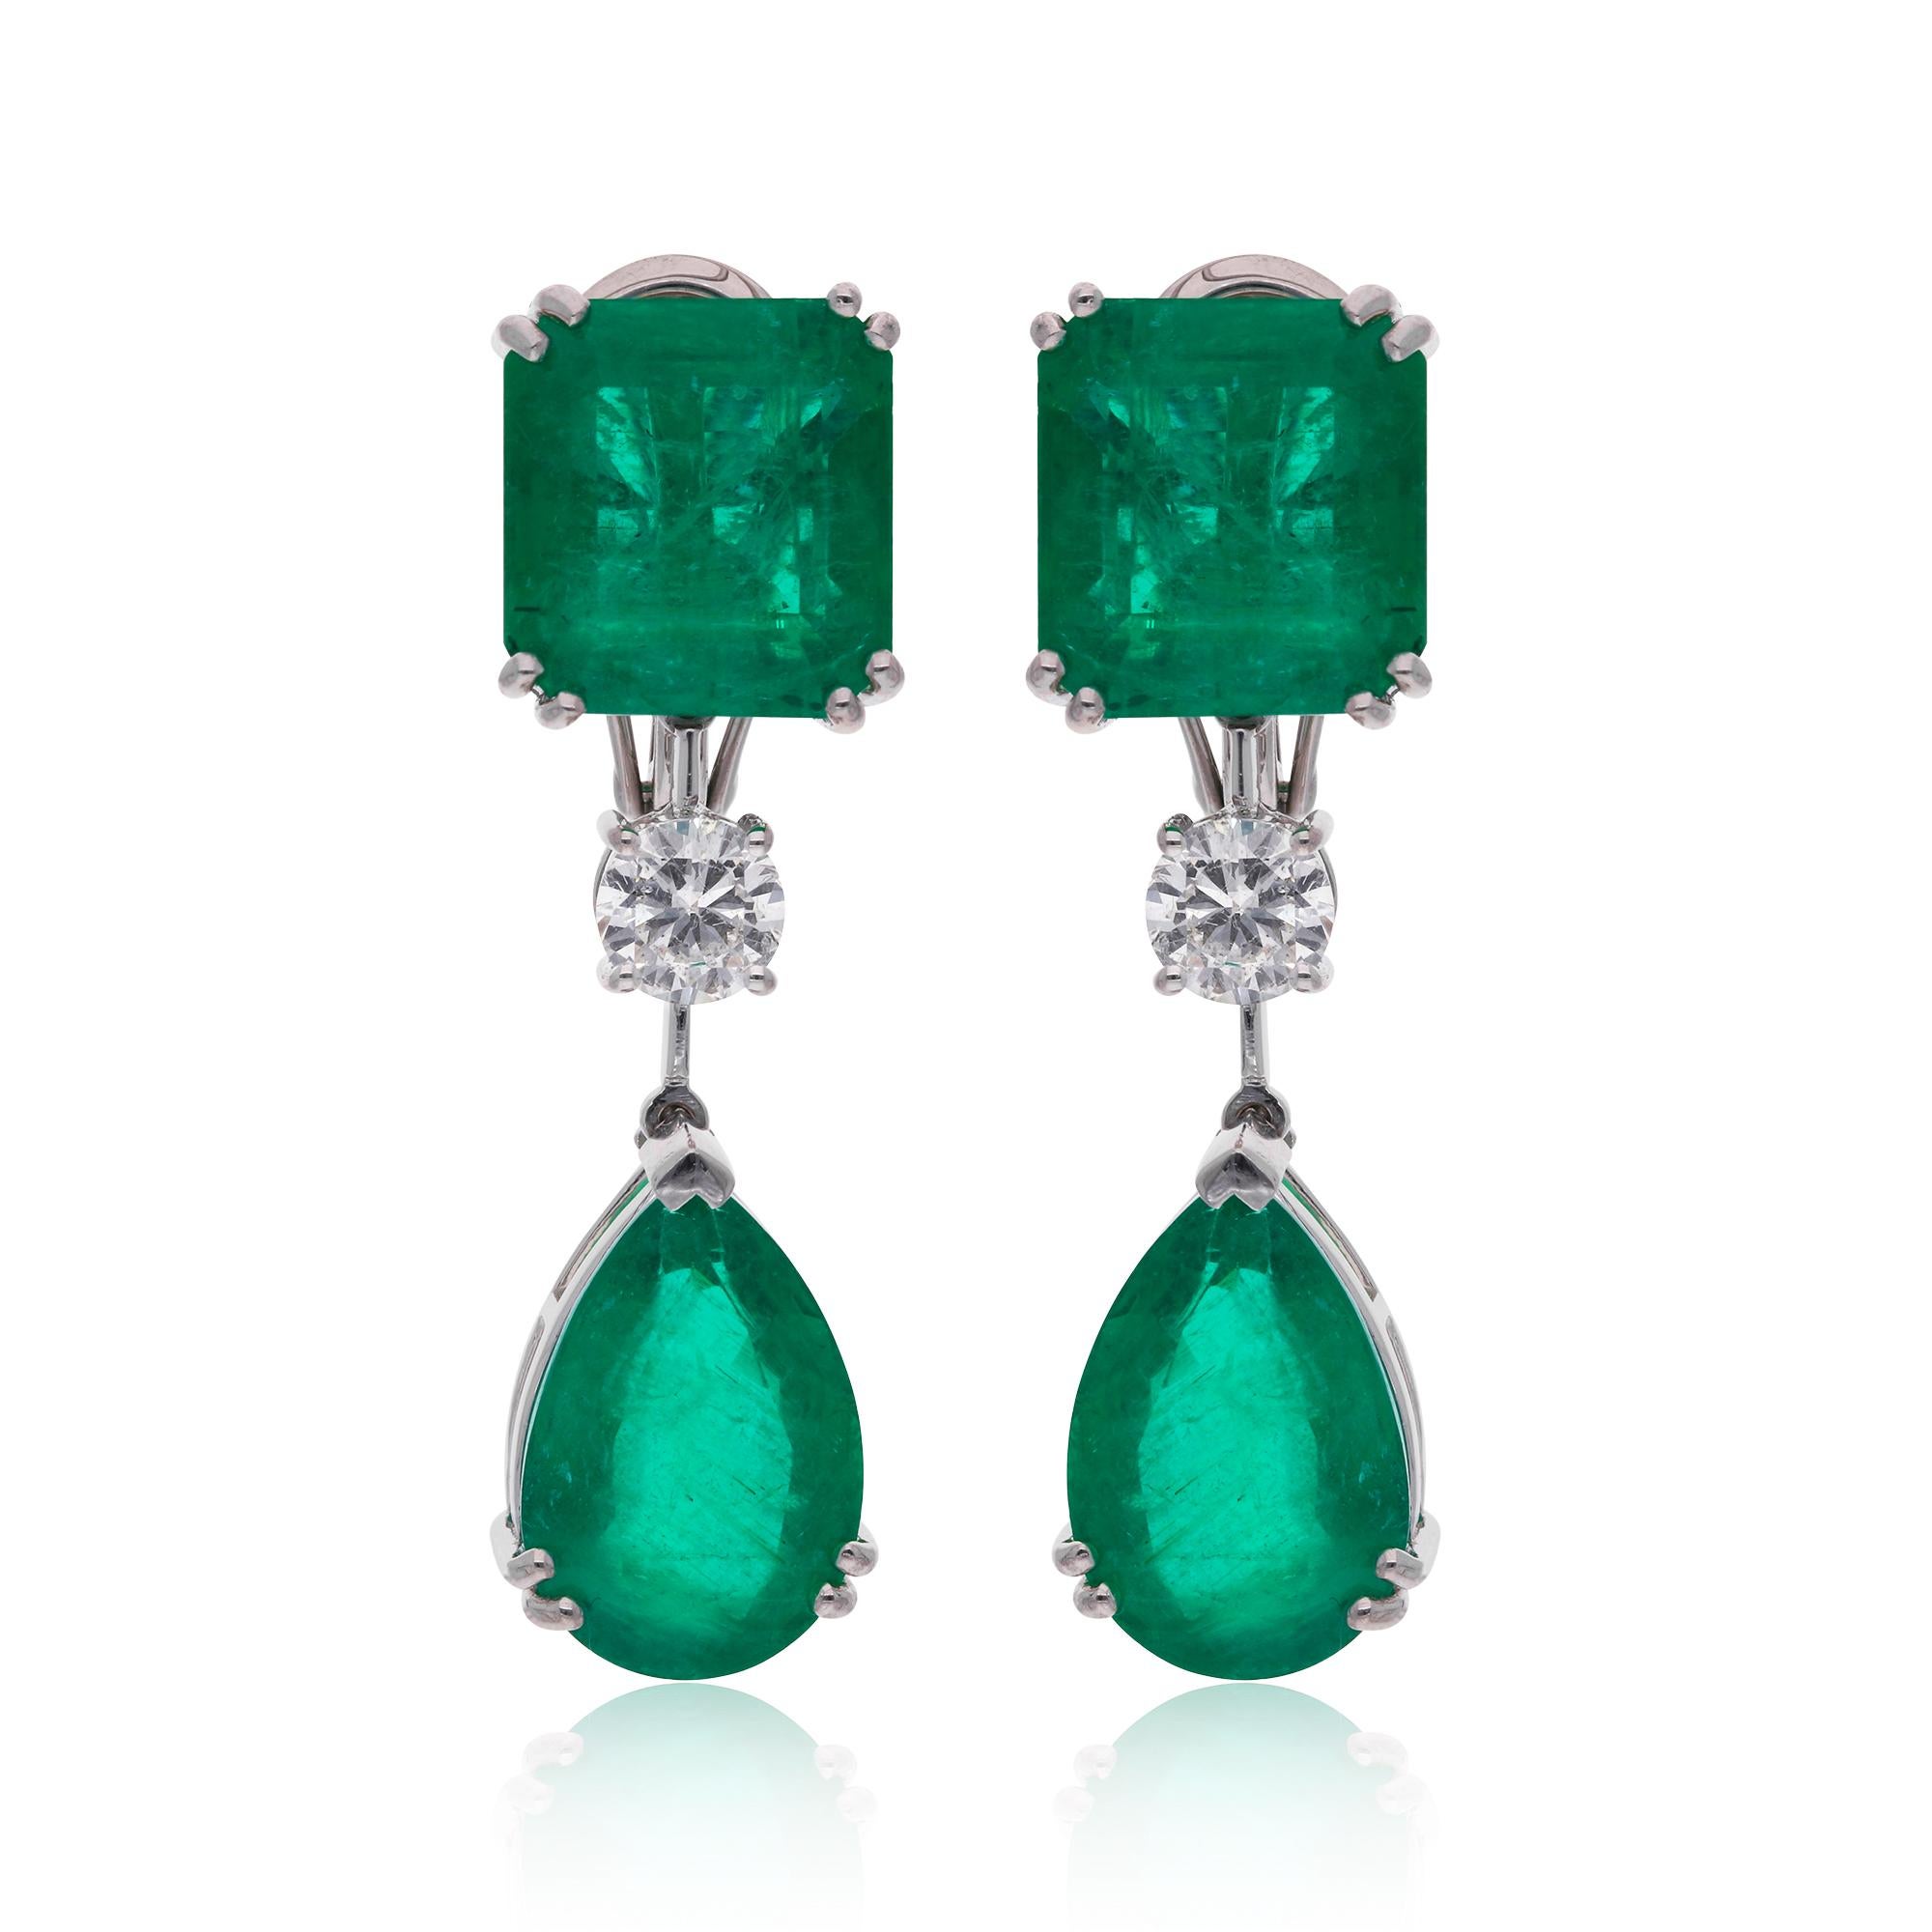 Immerse yourself in the captivating allure of these Zambian emerald gemstone dangle earrings, adorned with scintillating diamonds and meticulously crafted in luxurious 18 karat white gold. Each earring features a mesmerizing Zambian emerald